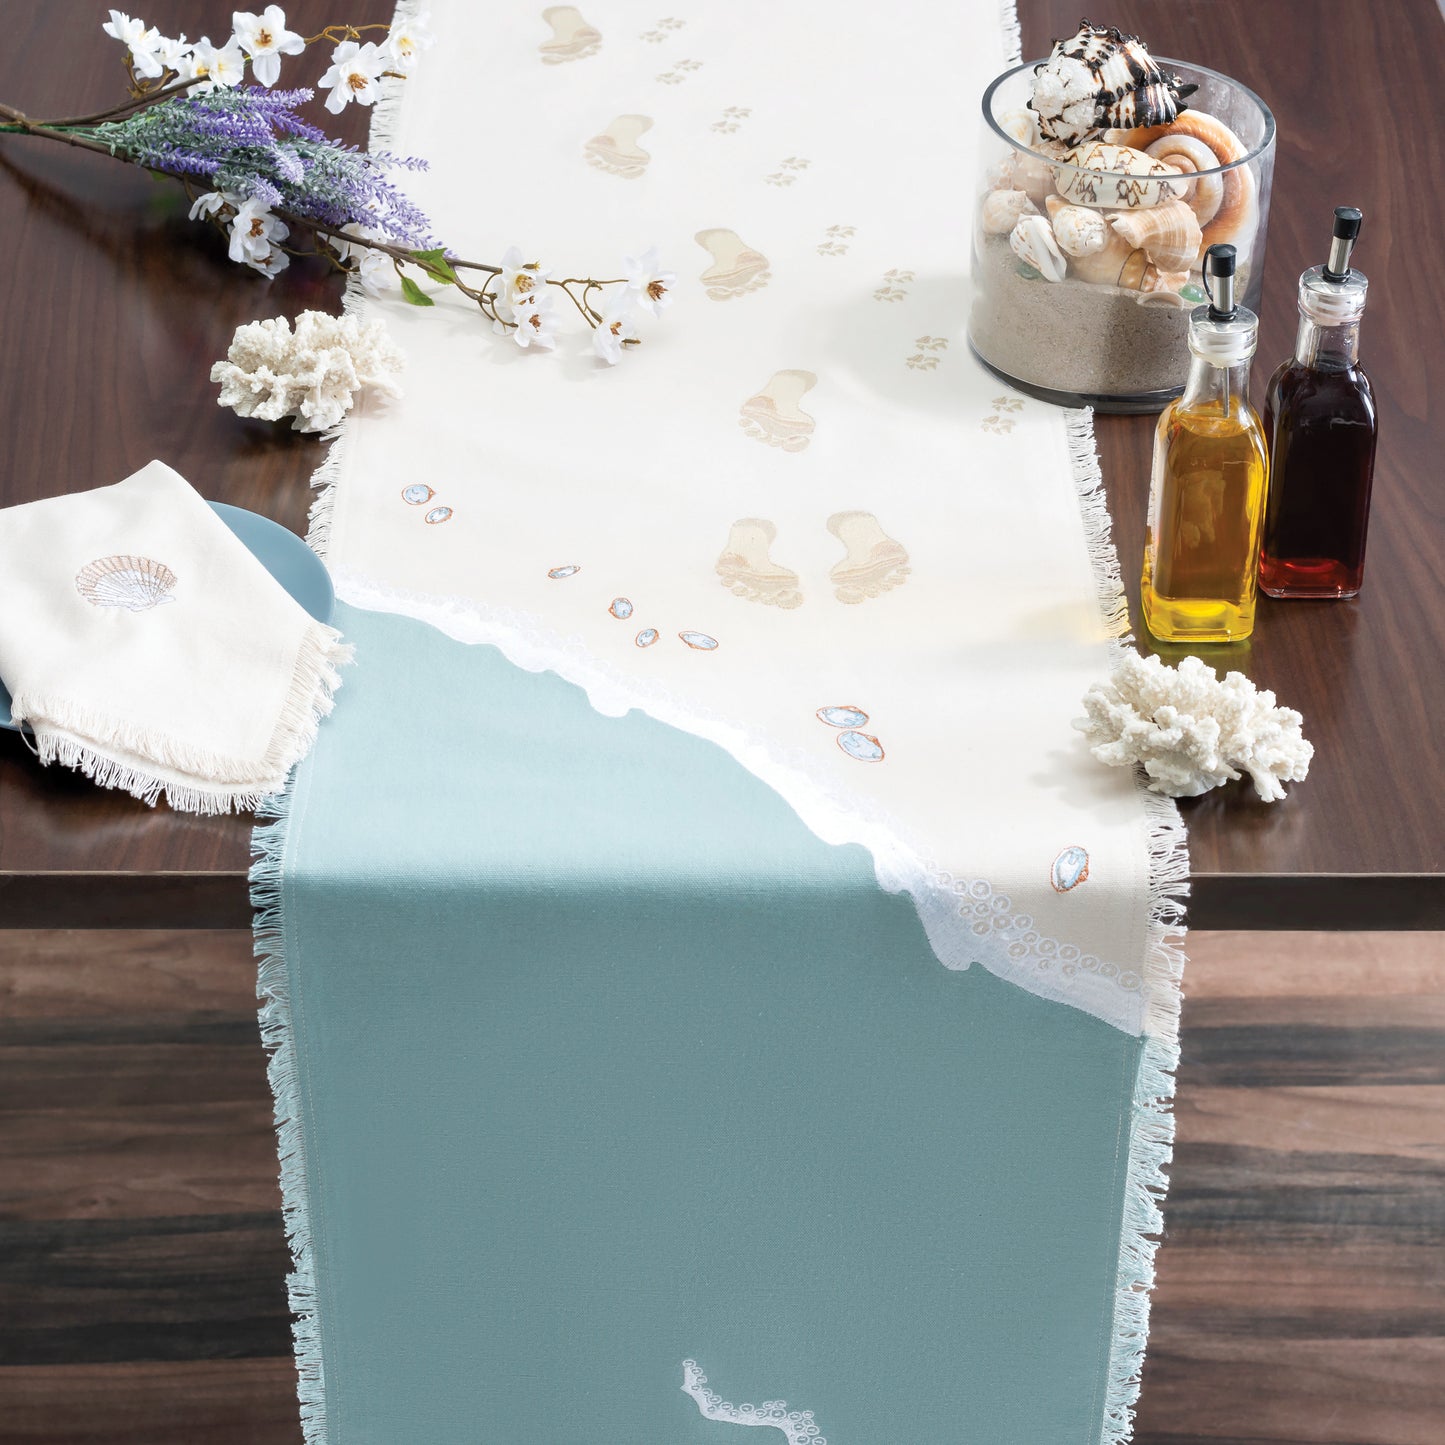 Human and Dog Foot Prints Embroidered Scene Table Runner on Table with Shells, Flowers, and Olive Oil